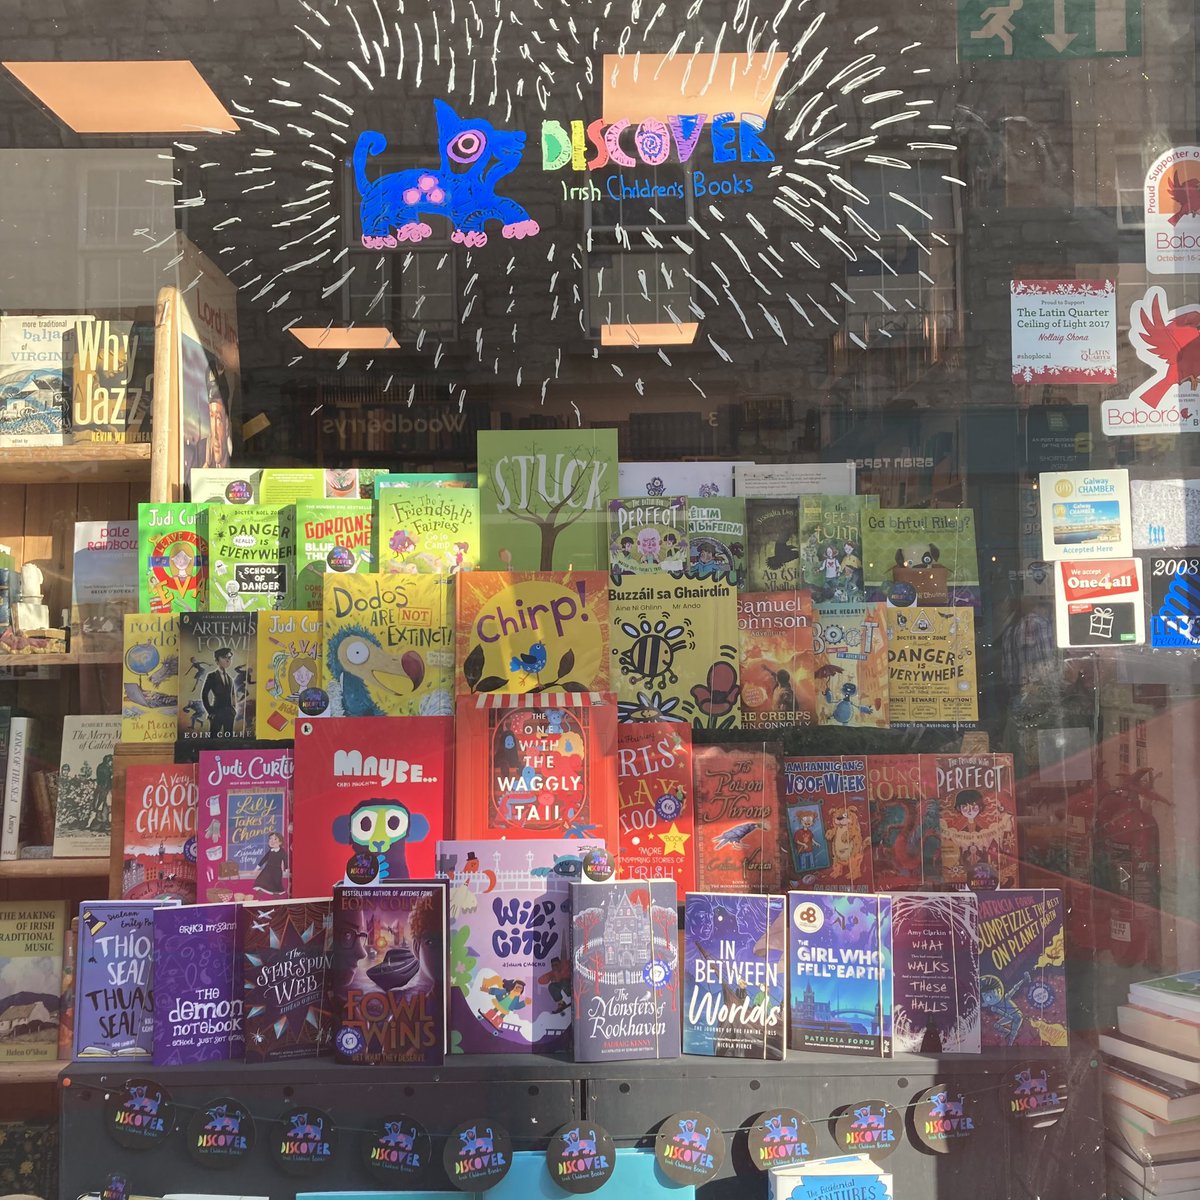 Check out our new window display celebrating all things #DiscoverIrishKidsBooks !!